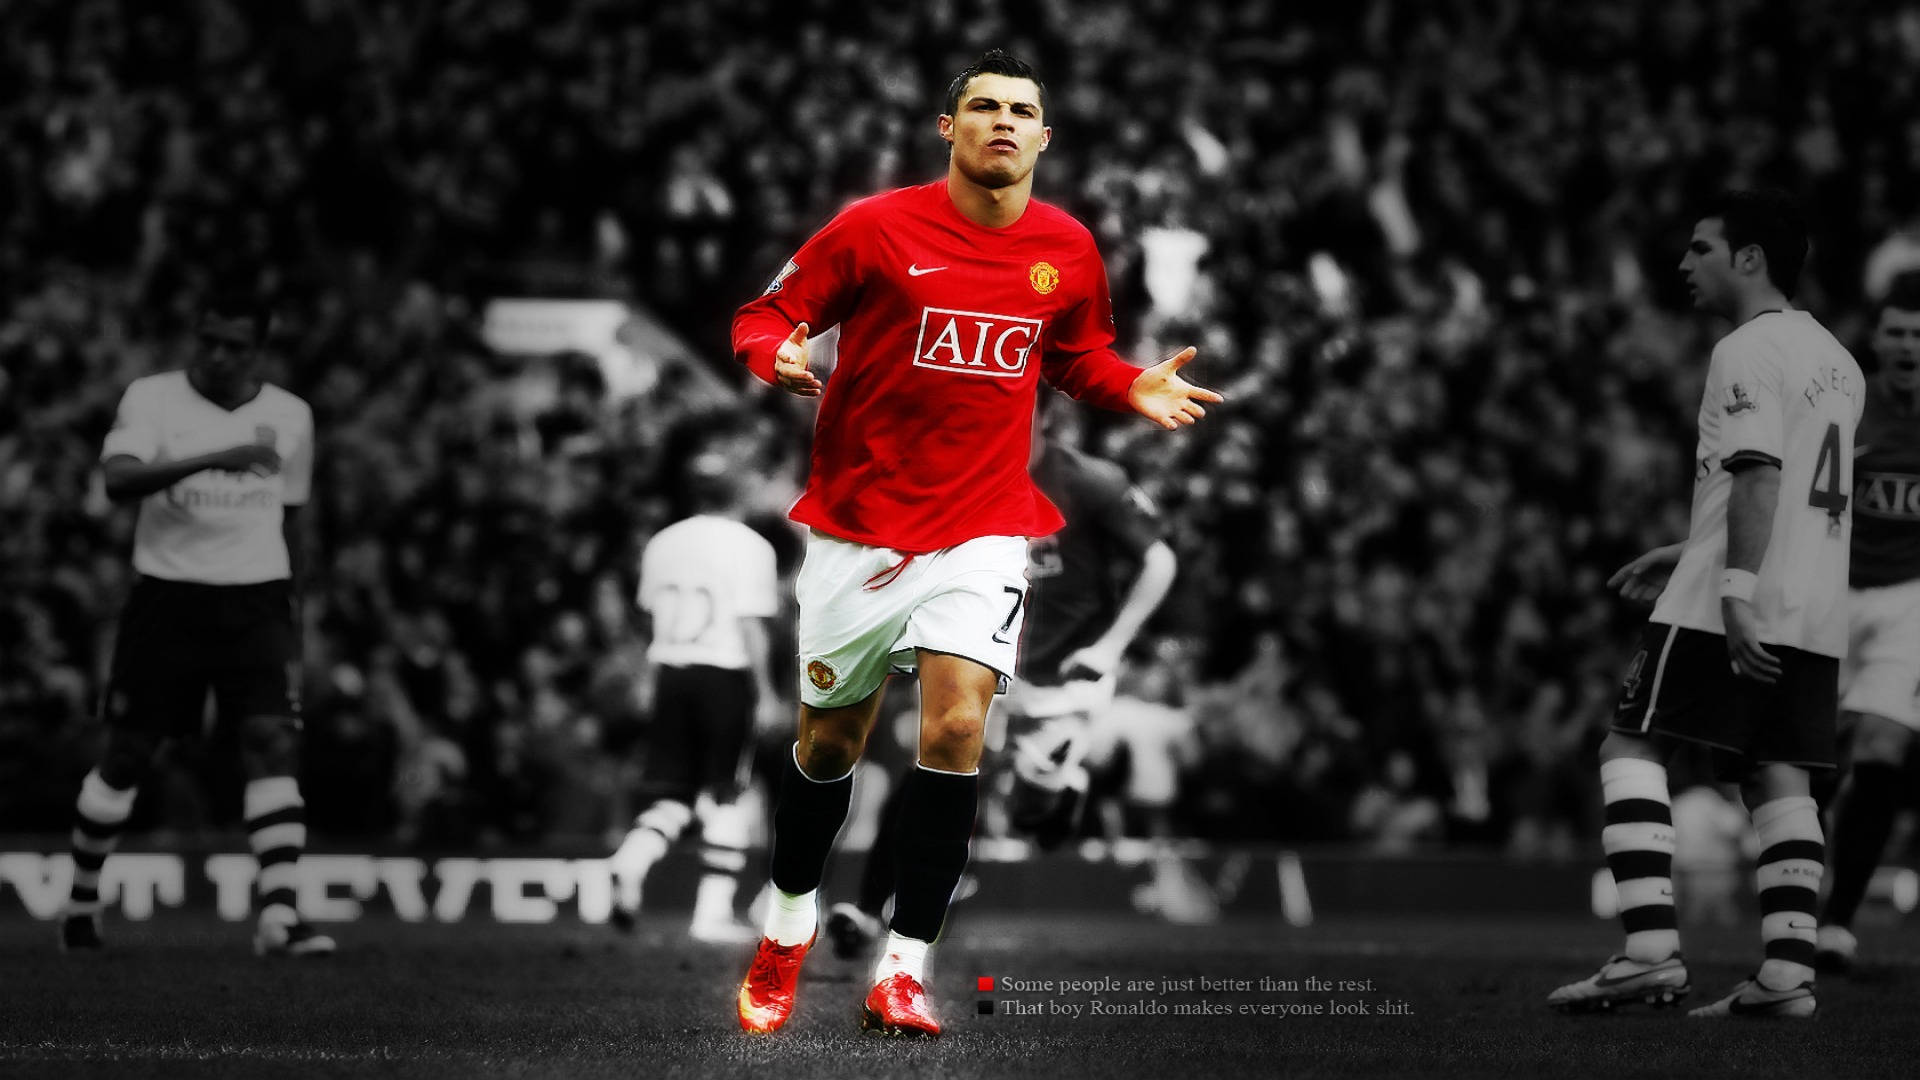 "Cristiano Ronaldo in his days with Manchester United". Wallpaper